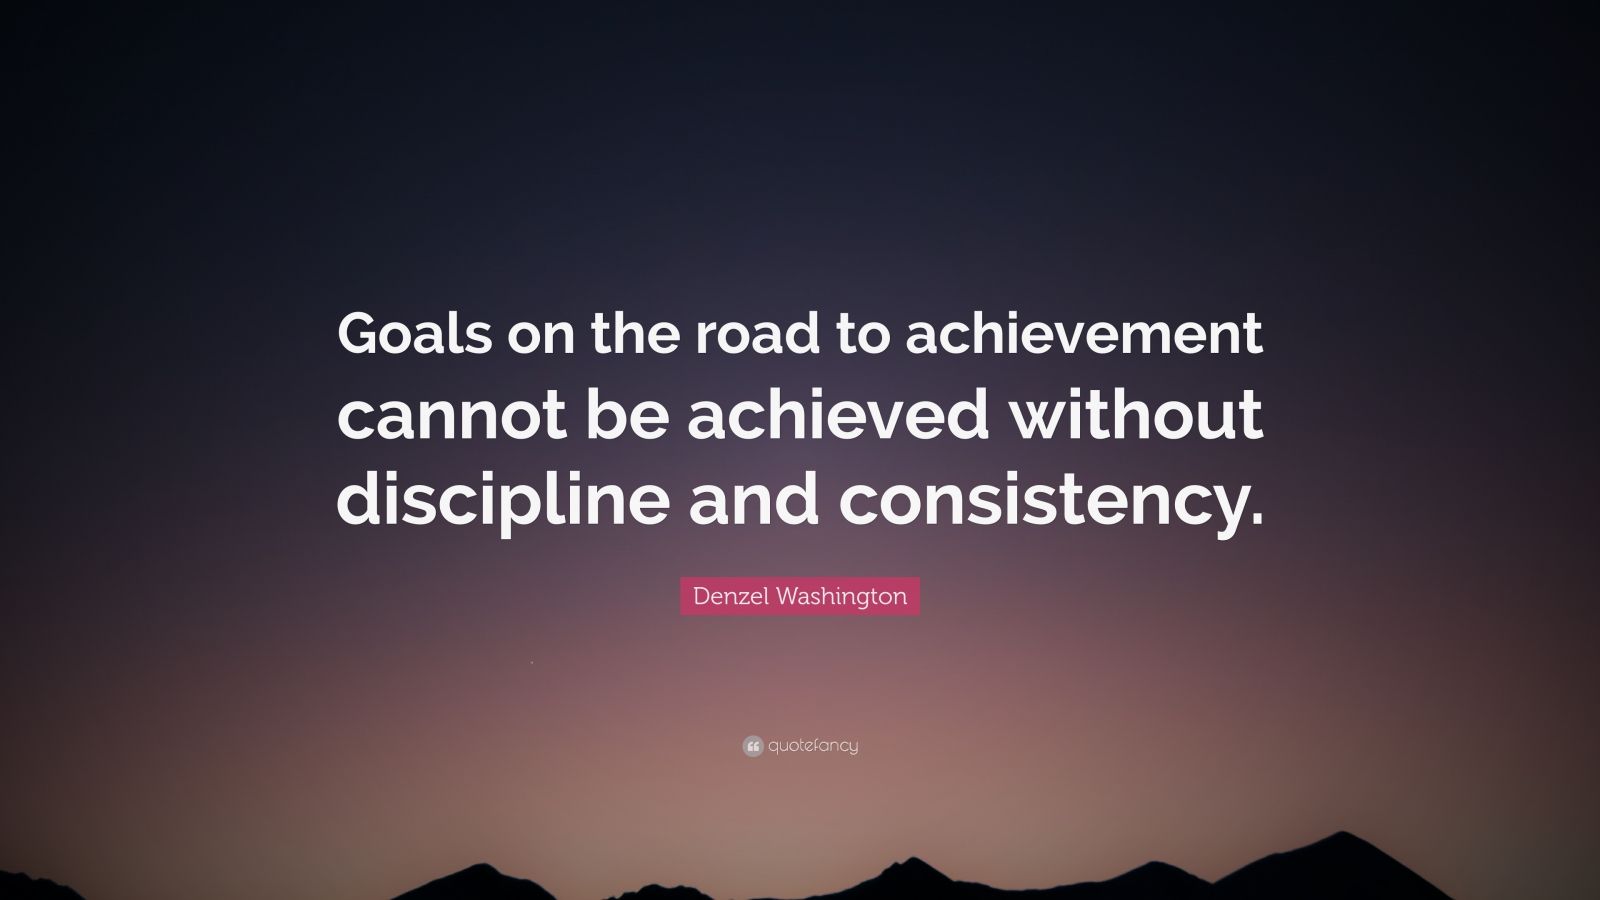 Denzel Washington Quote: “Goals on the road to achievement cannot be ...